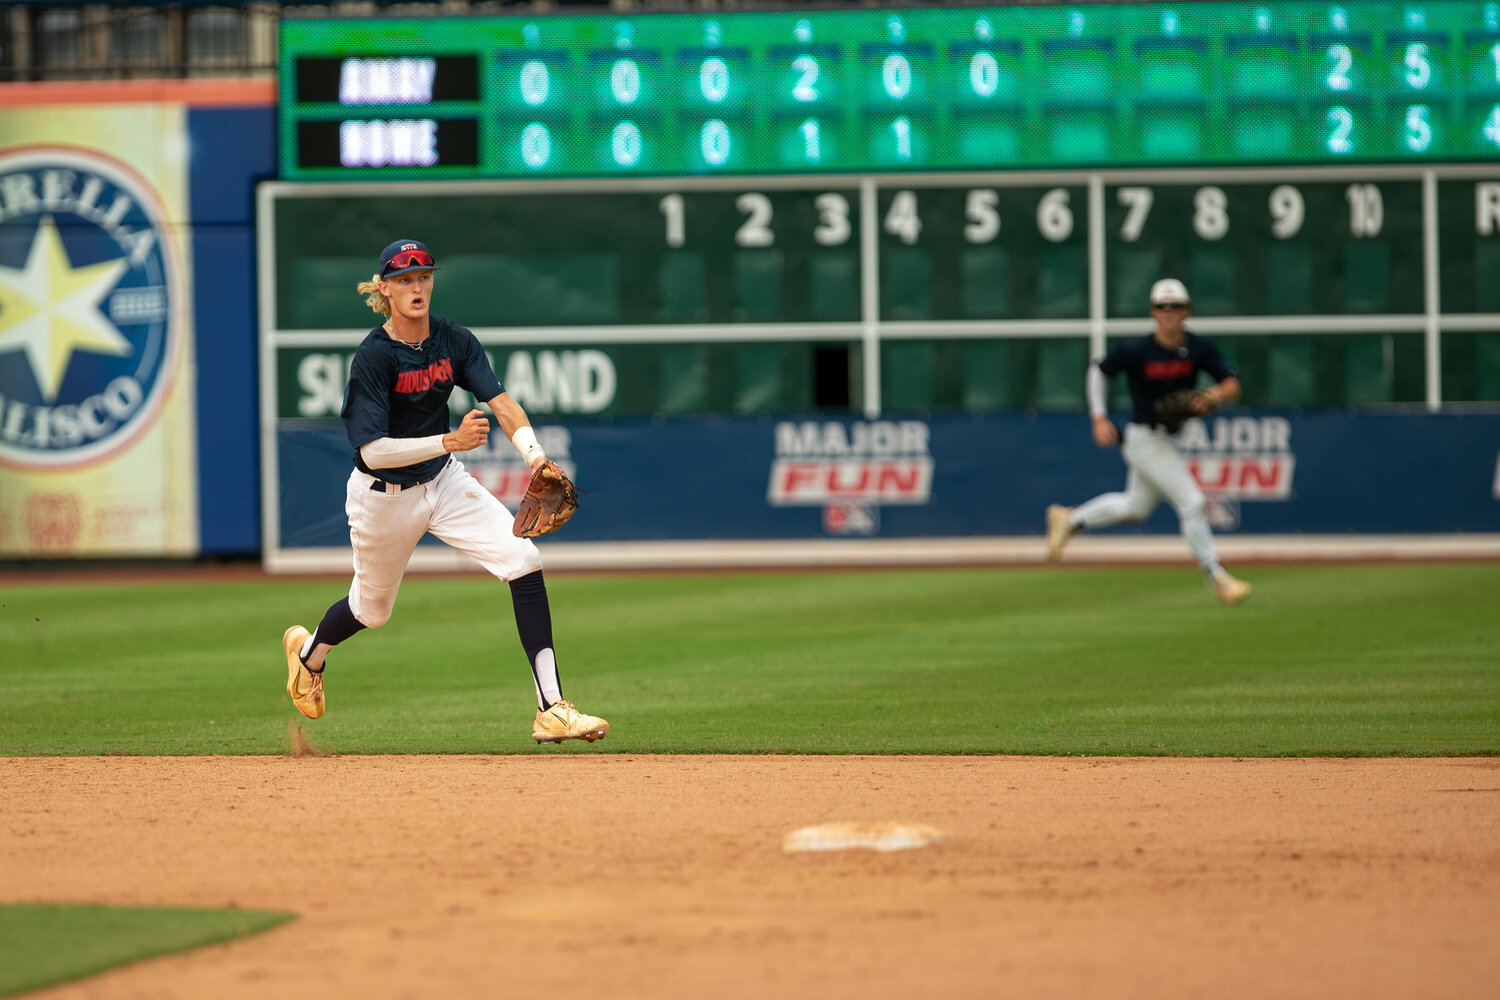 Drew Markle runs towards second base during Tuesday's GHBCA Senior All-Star game at Constellation Field in Sugar Land.